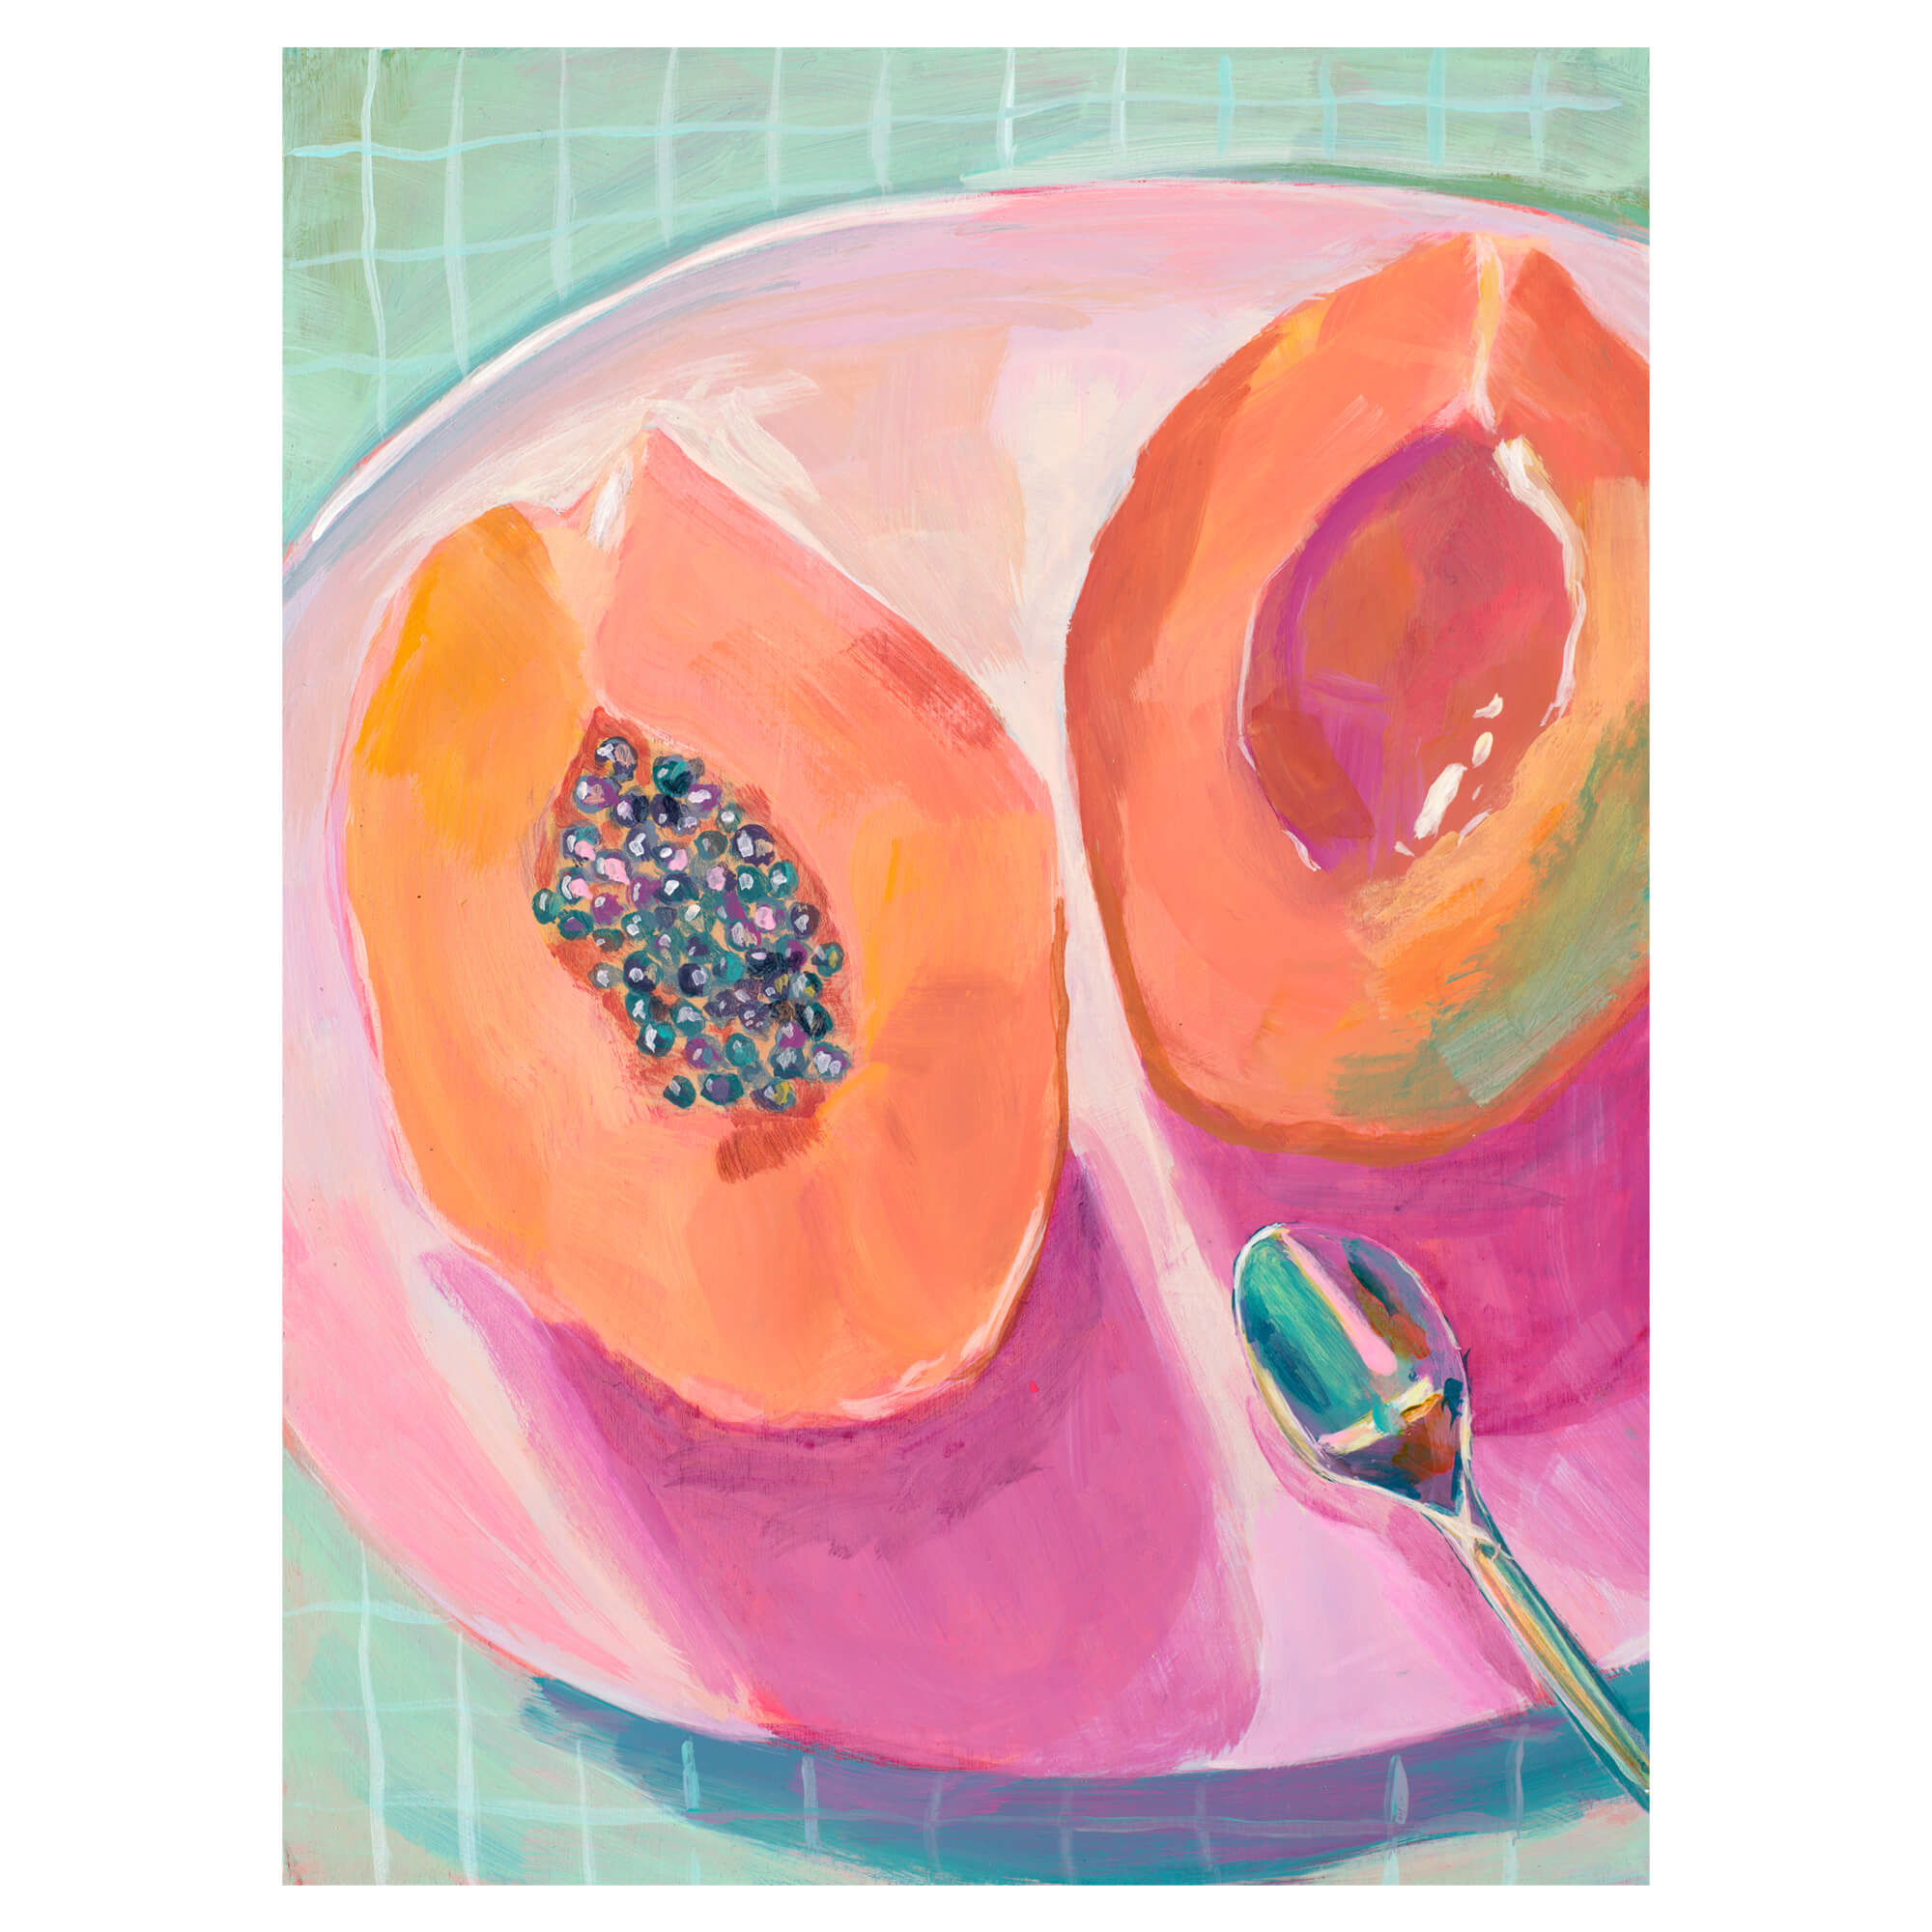 A papaya painting with pastel colors by Hawaii artist Lindsay Wilkins